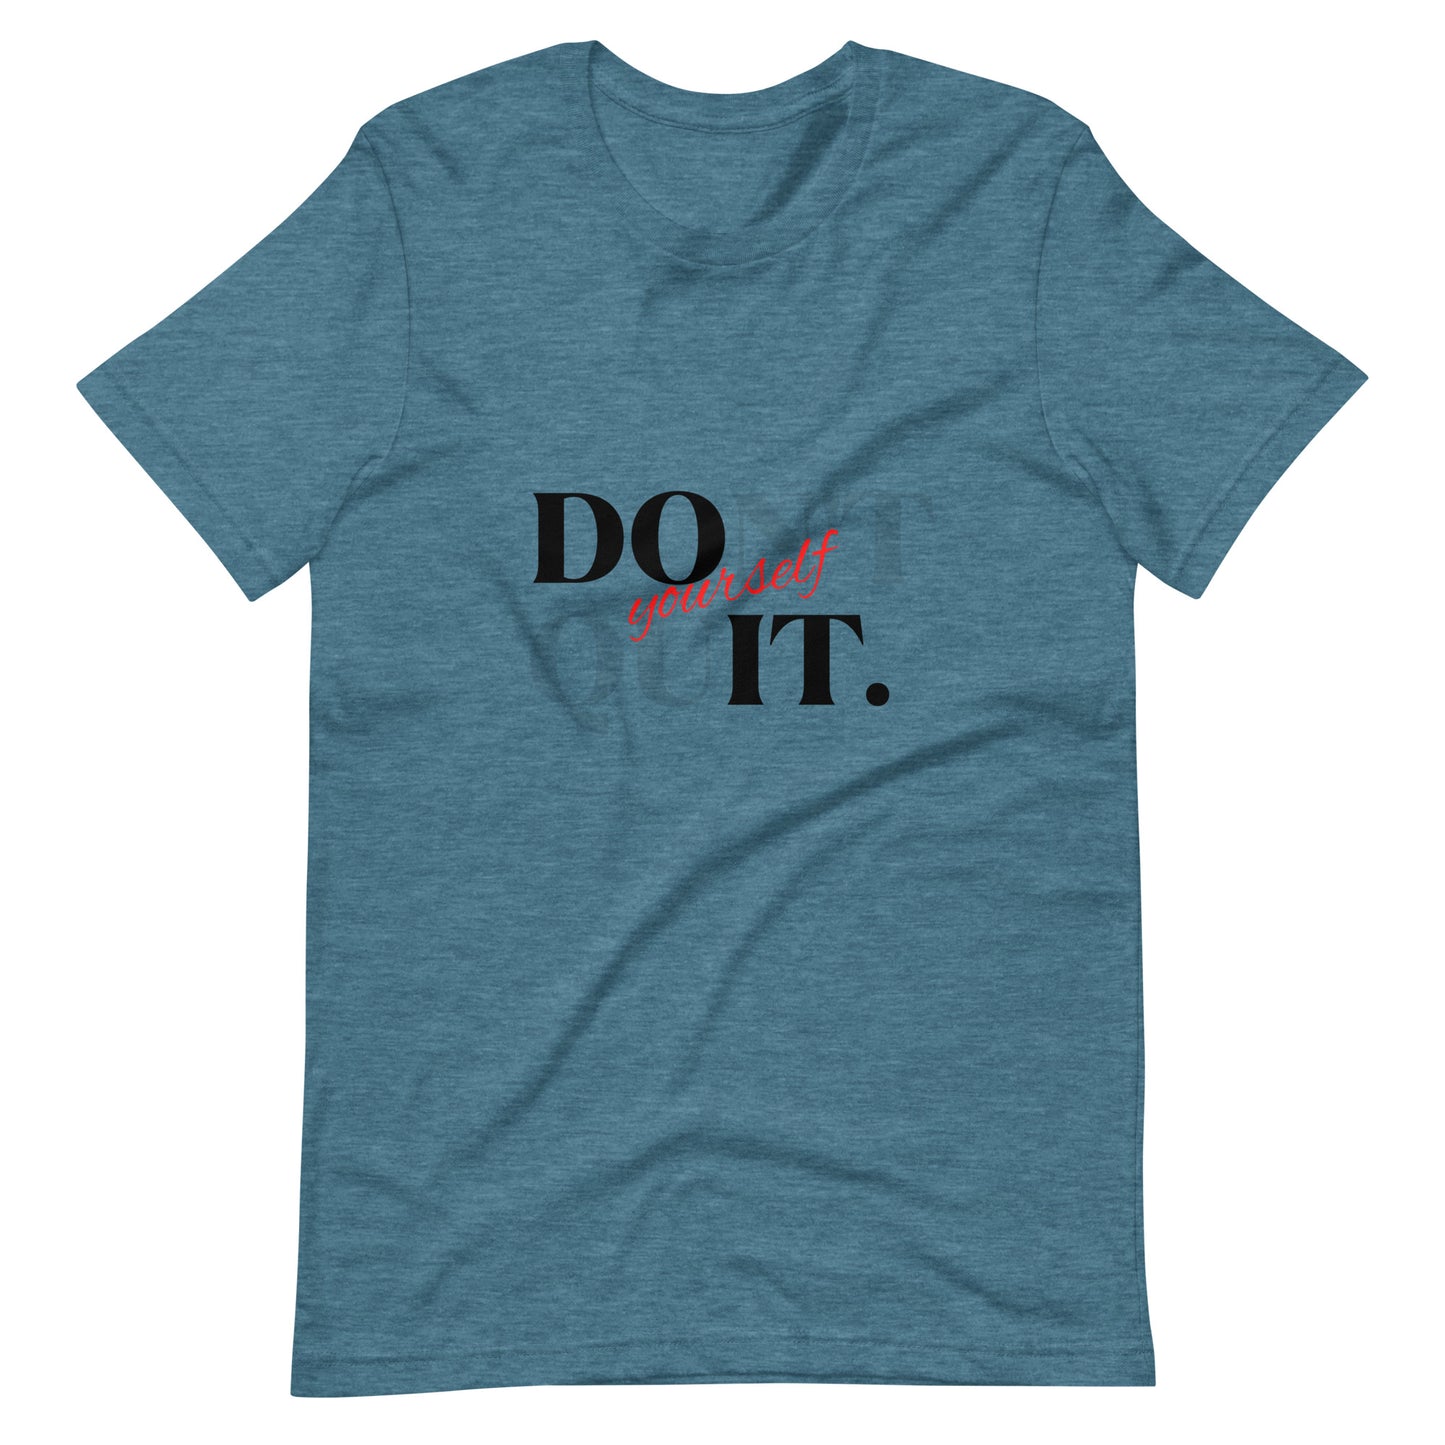 "Do It Yourself" Unisex T-Shirt